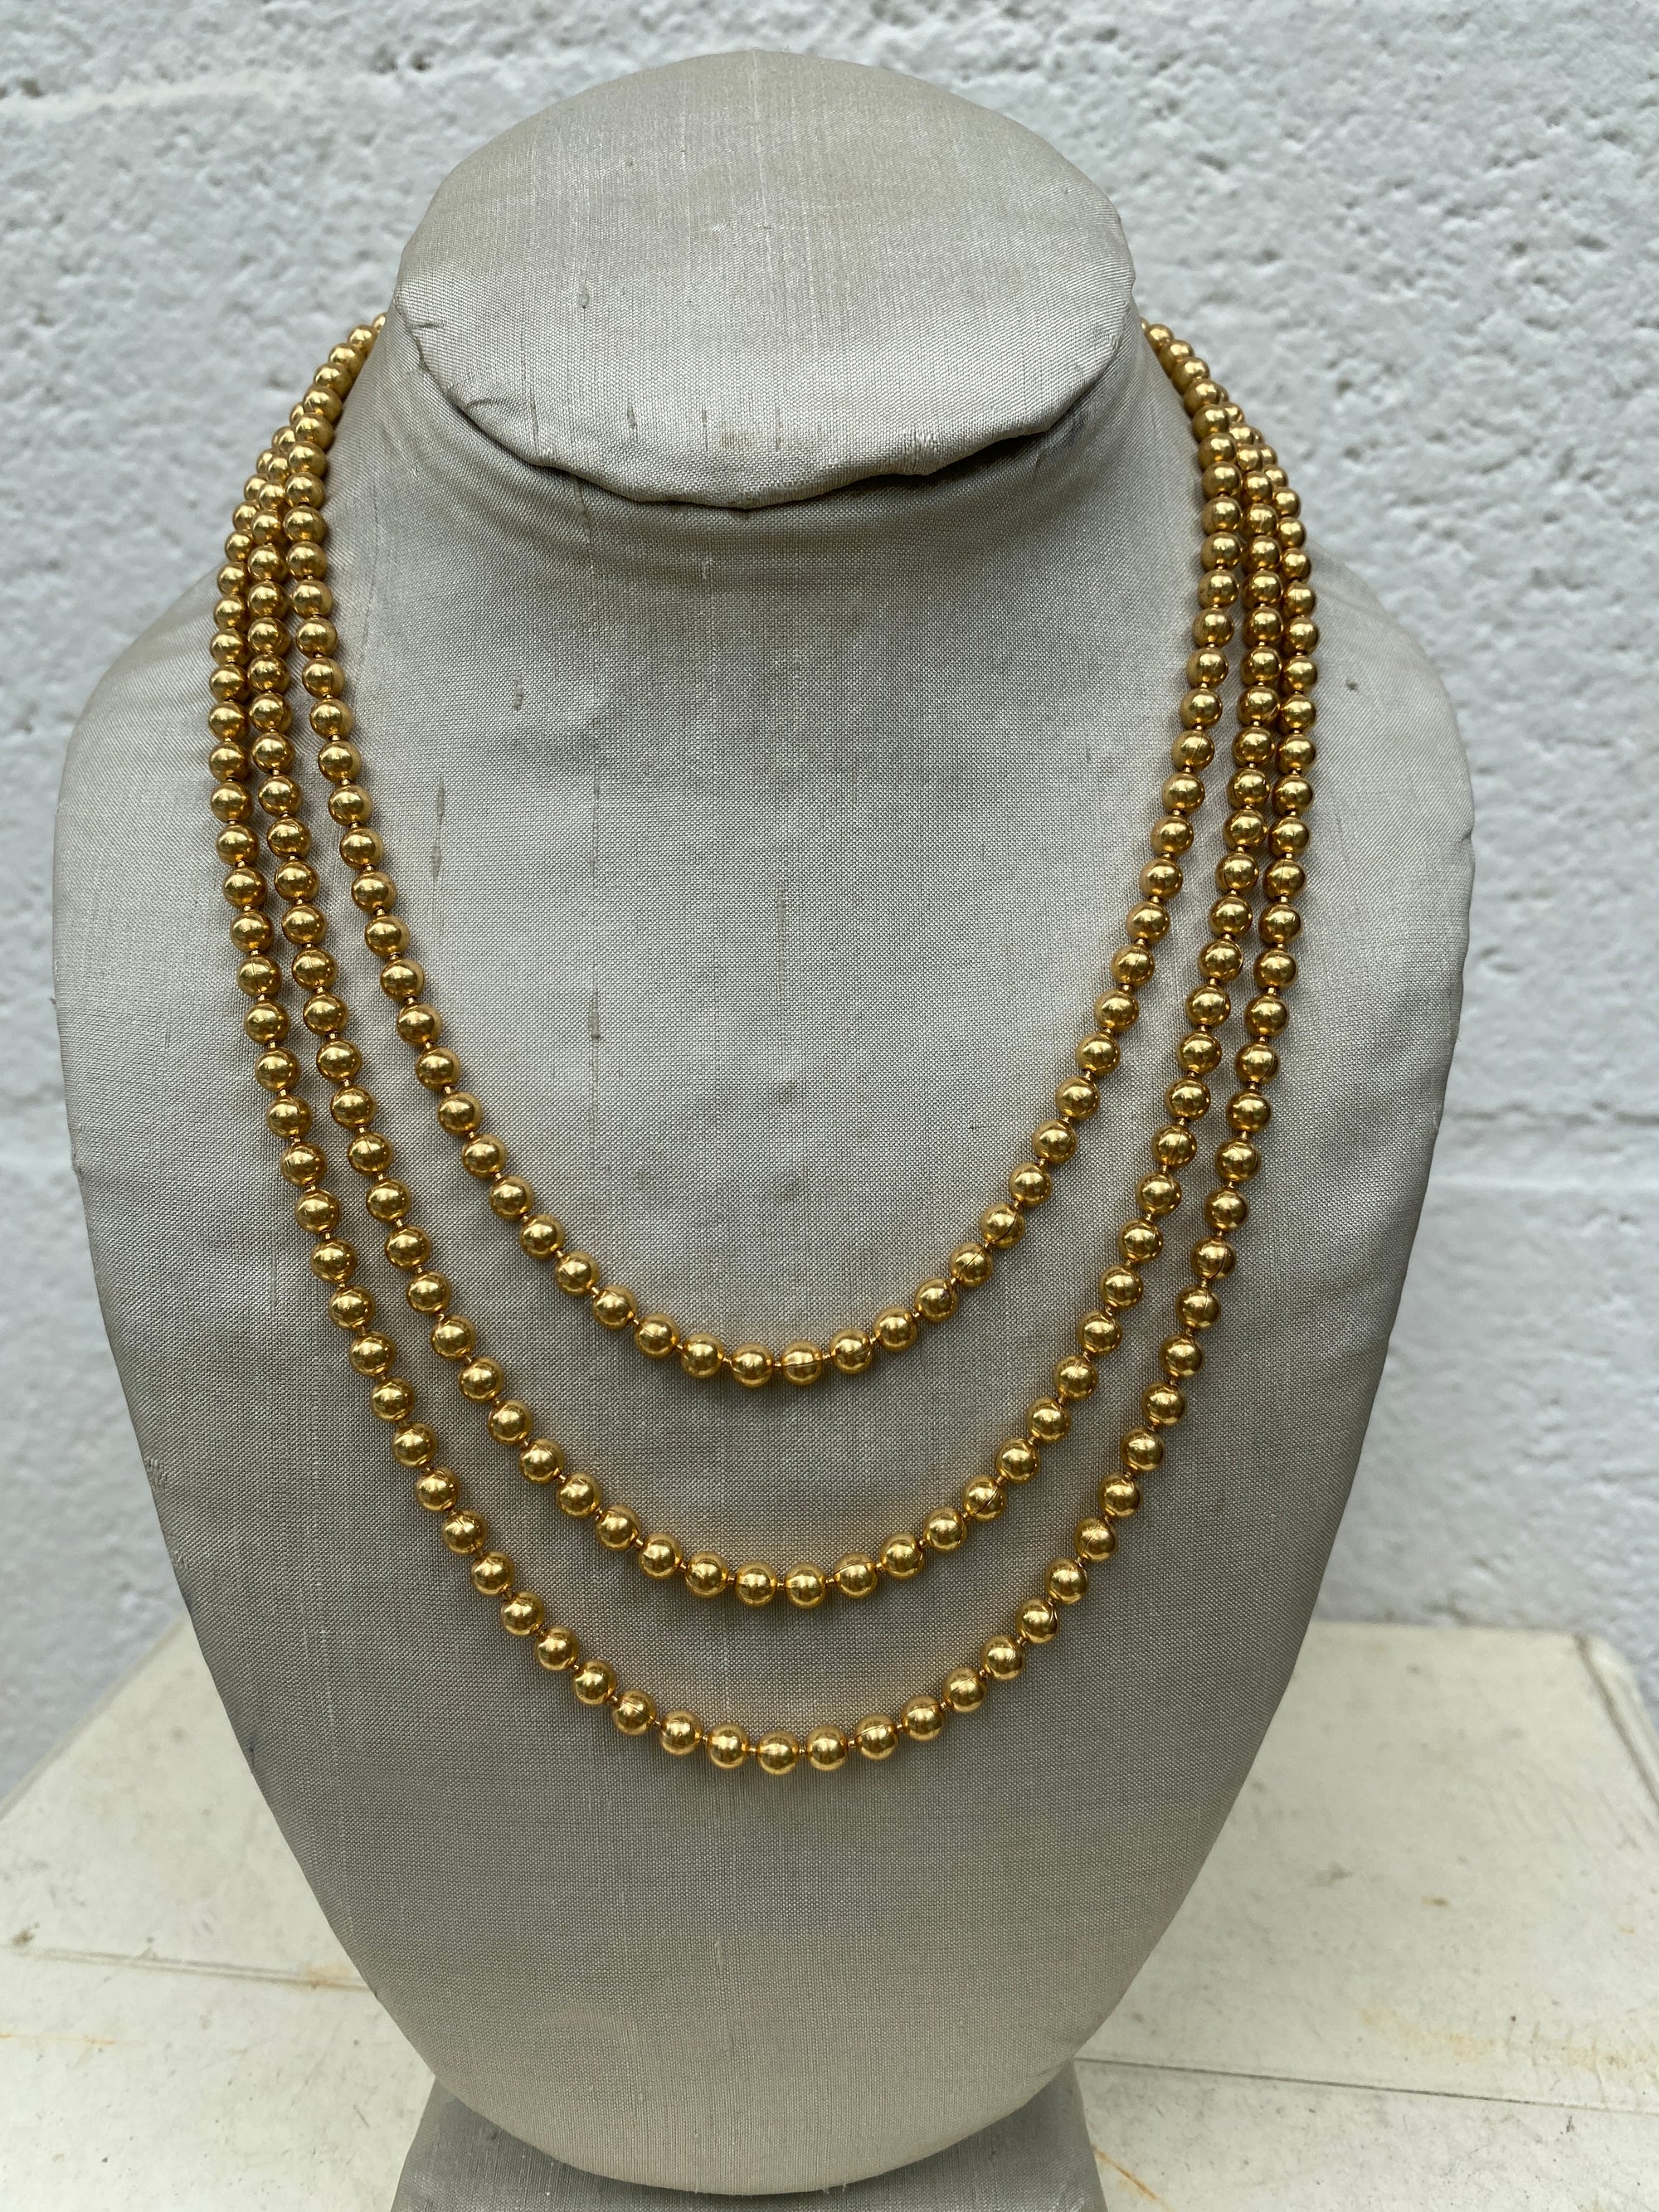 Long ball chain wrap necklace